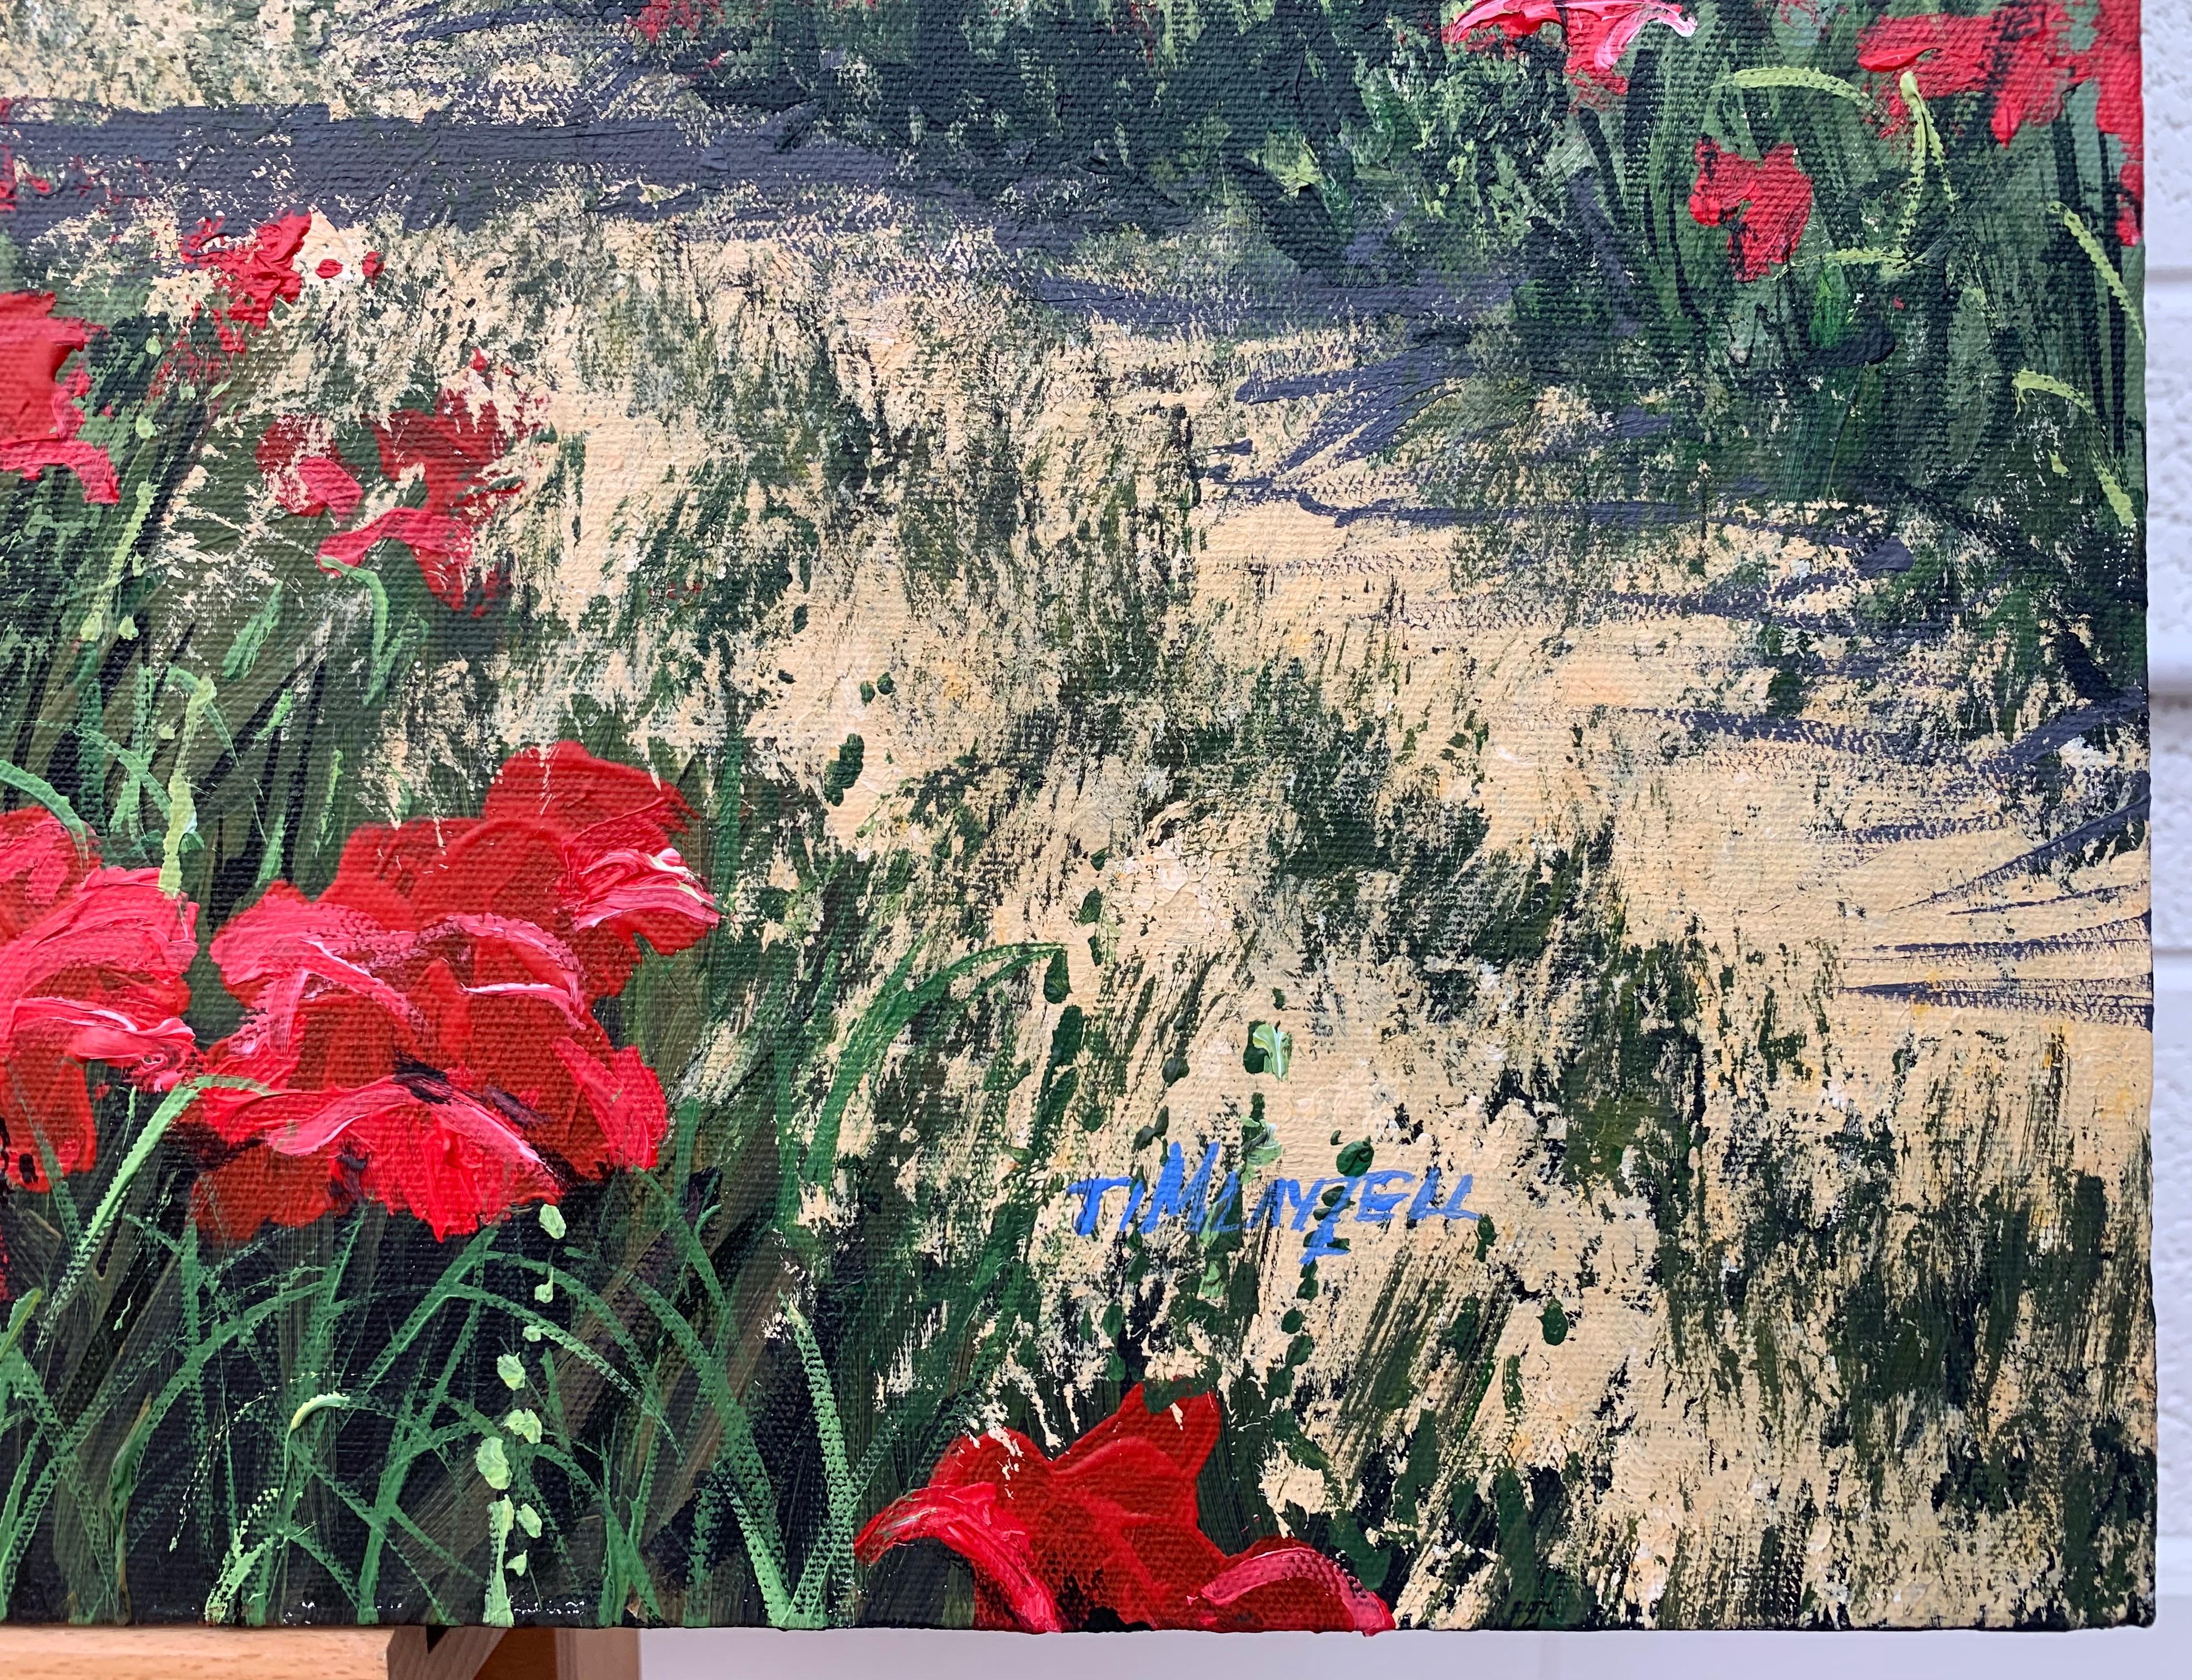 Bright Red Poppy Field in the Sunshine in Europe by Contemporary British Artist 4